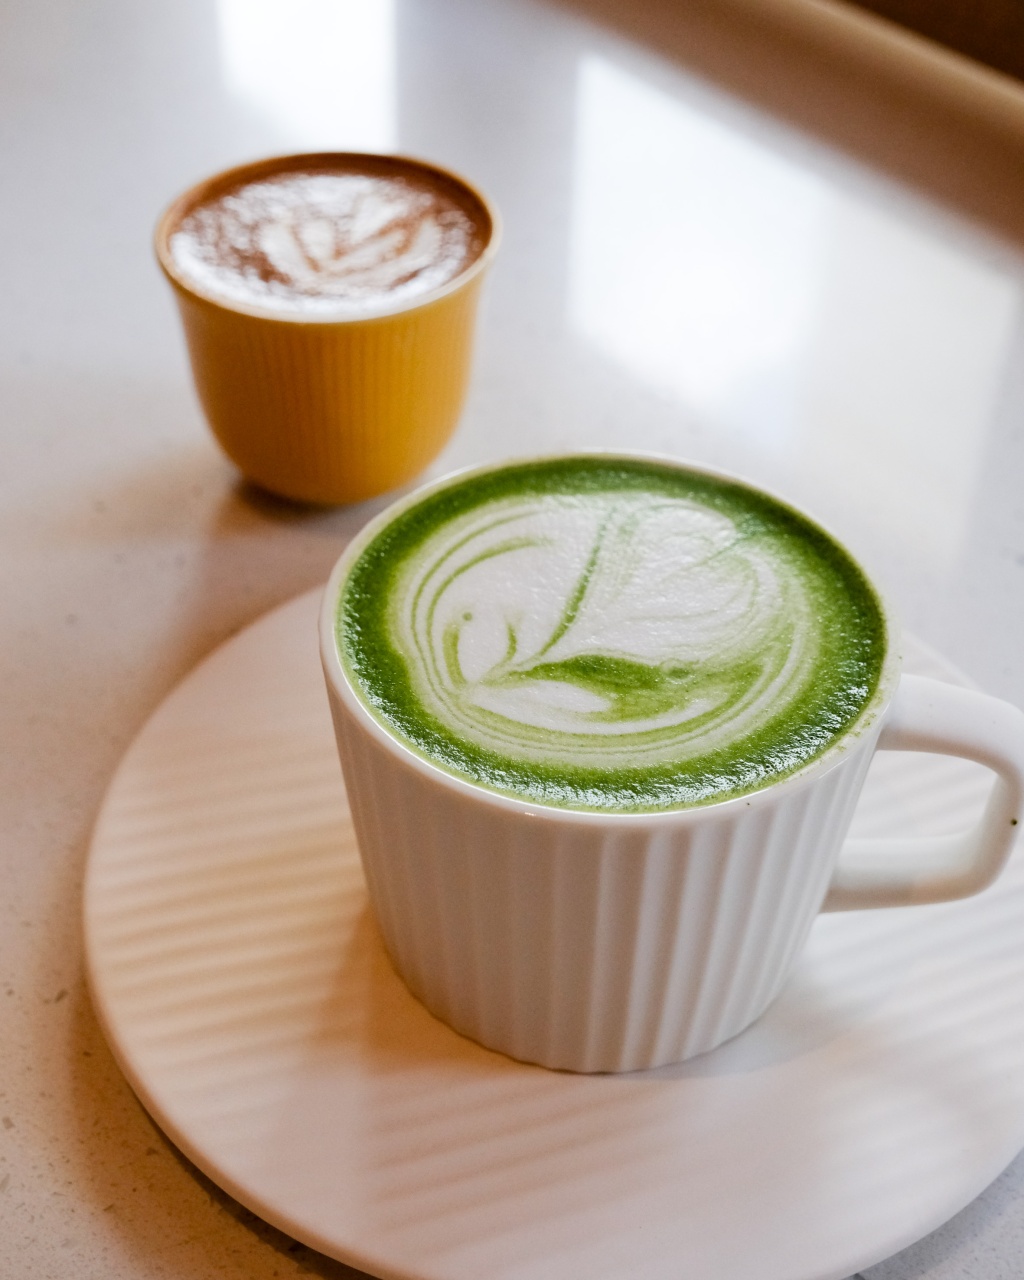 From top: Piccolo and matcha latte